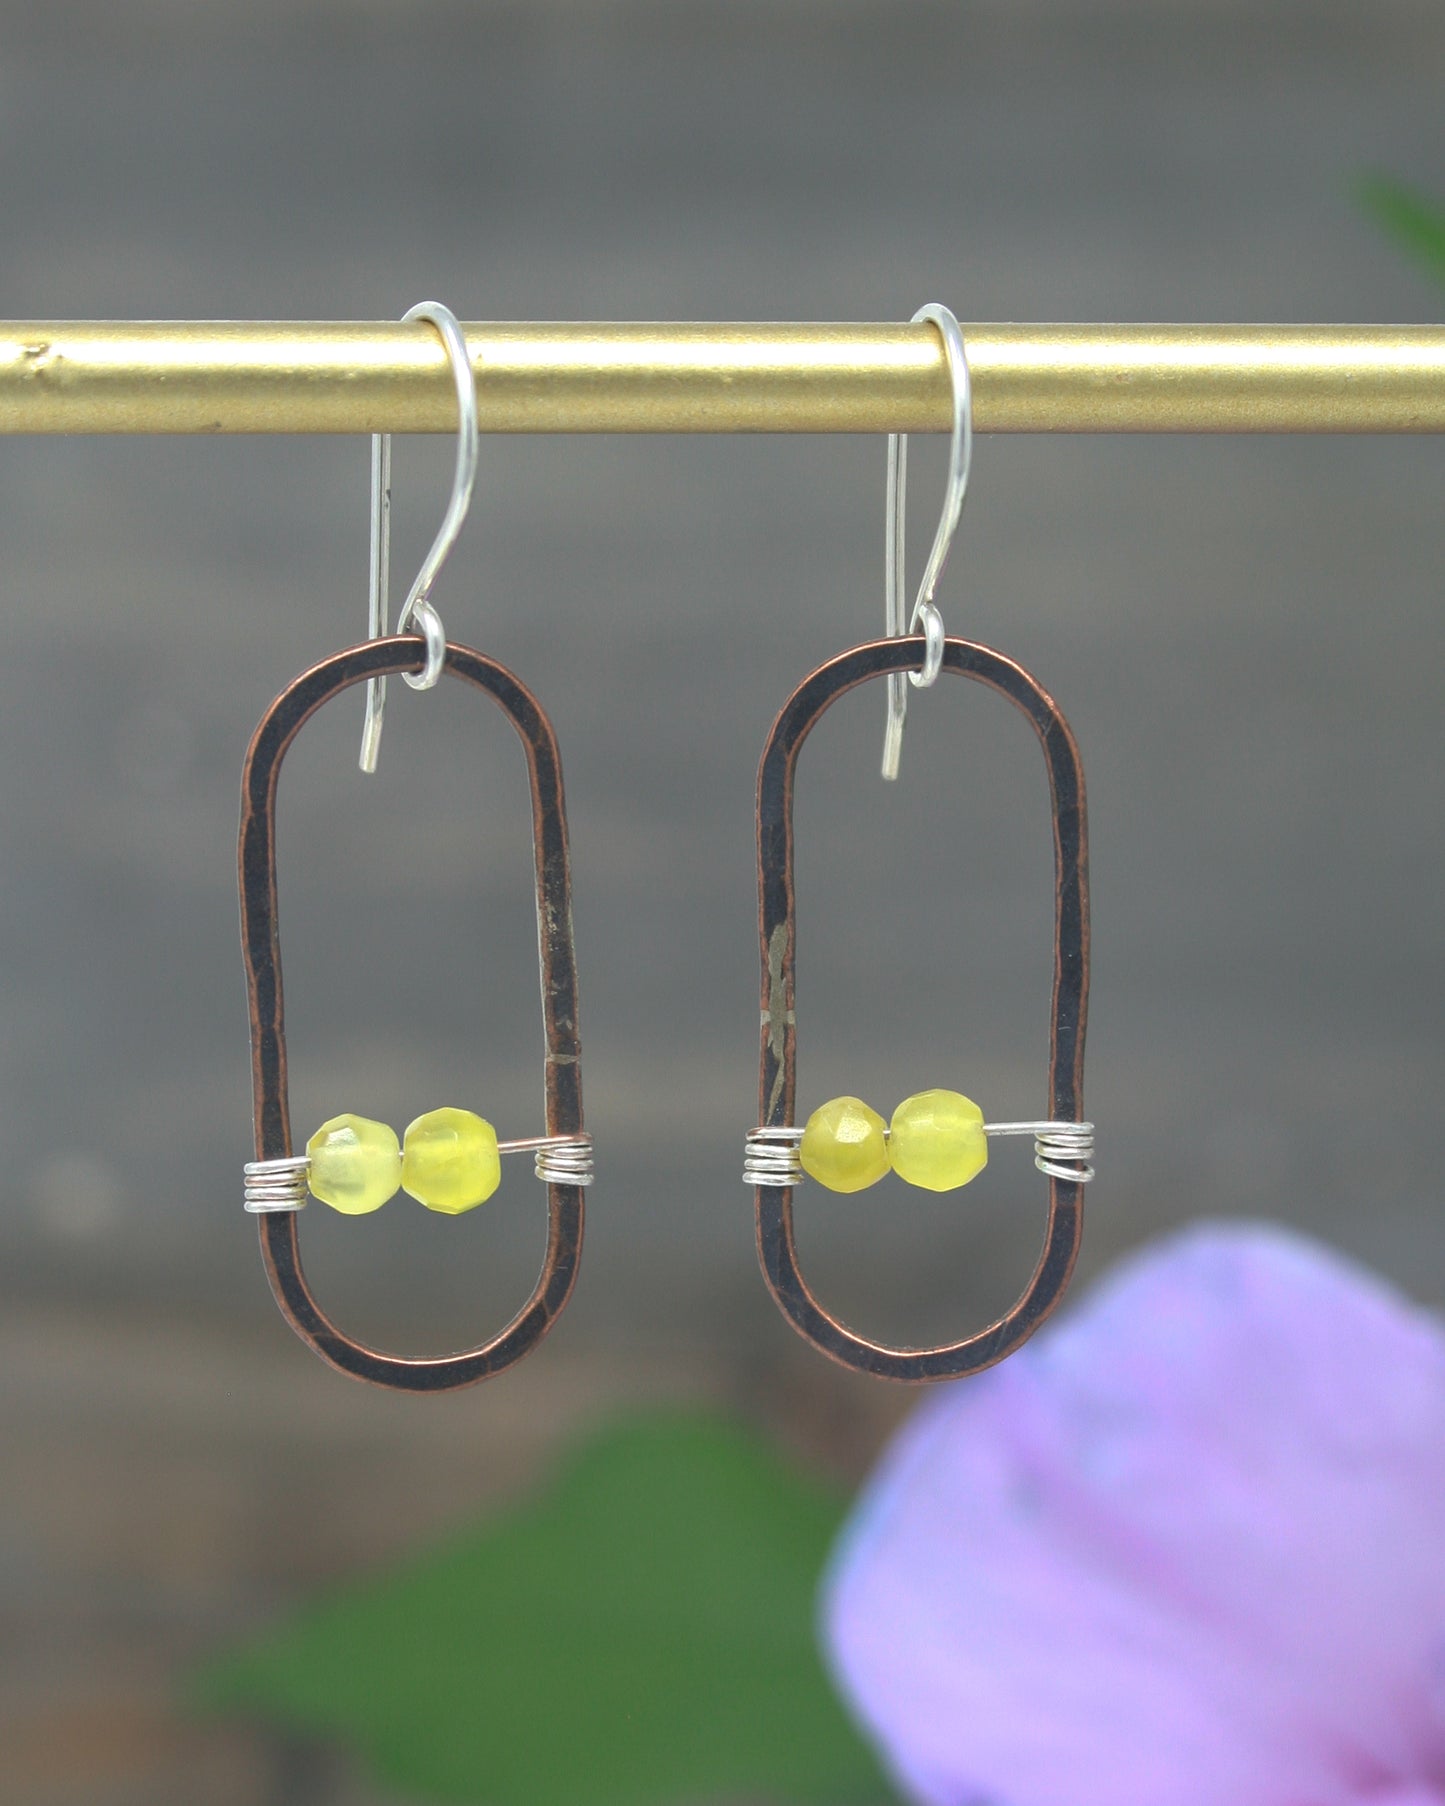 a pair of earrings with yellow beads hanging from a hook